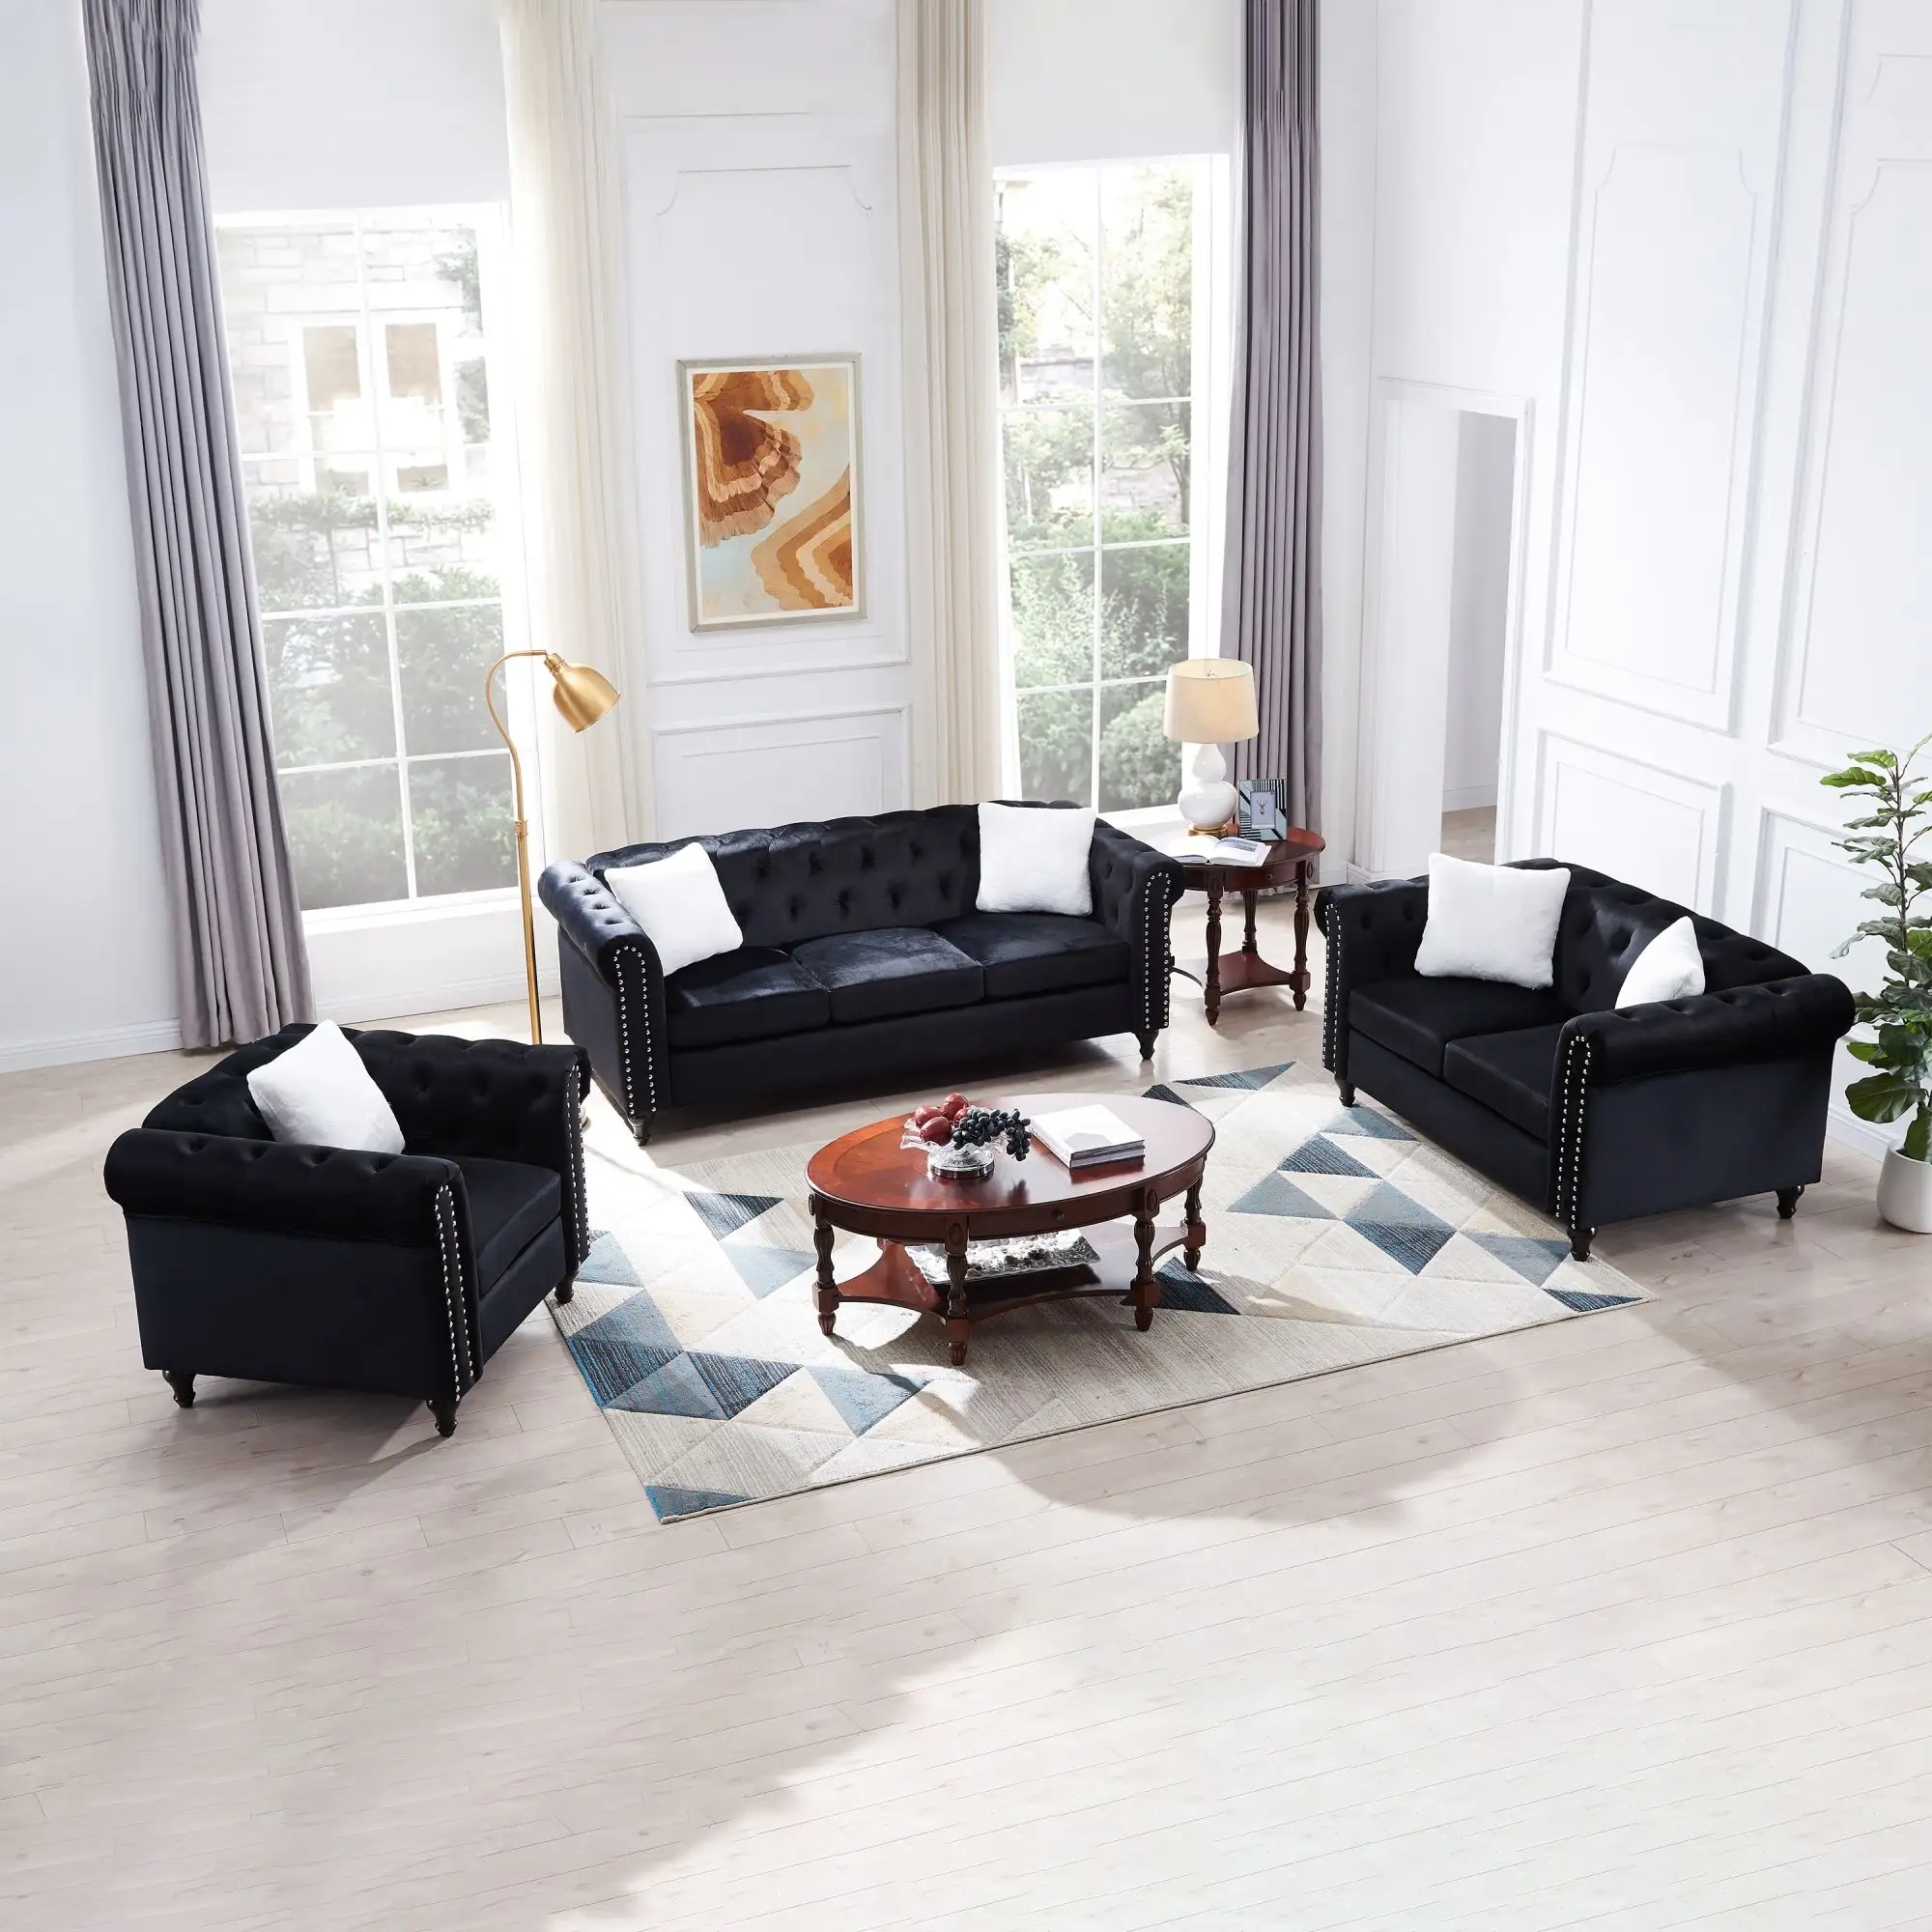 3 PCS Living Room Sofa Set, 3-Seater, Loveseat and Chair, with Five White Villose Pillow, Black Chesterfield Couch